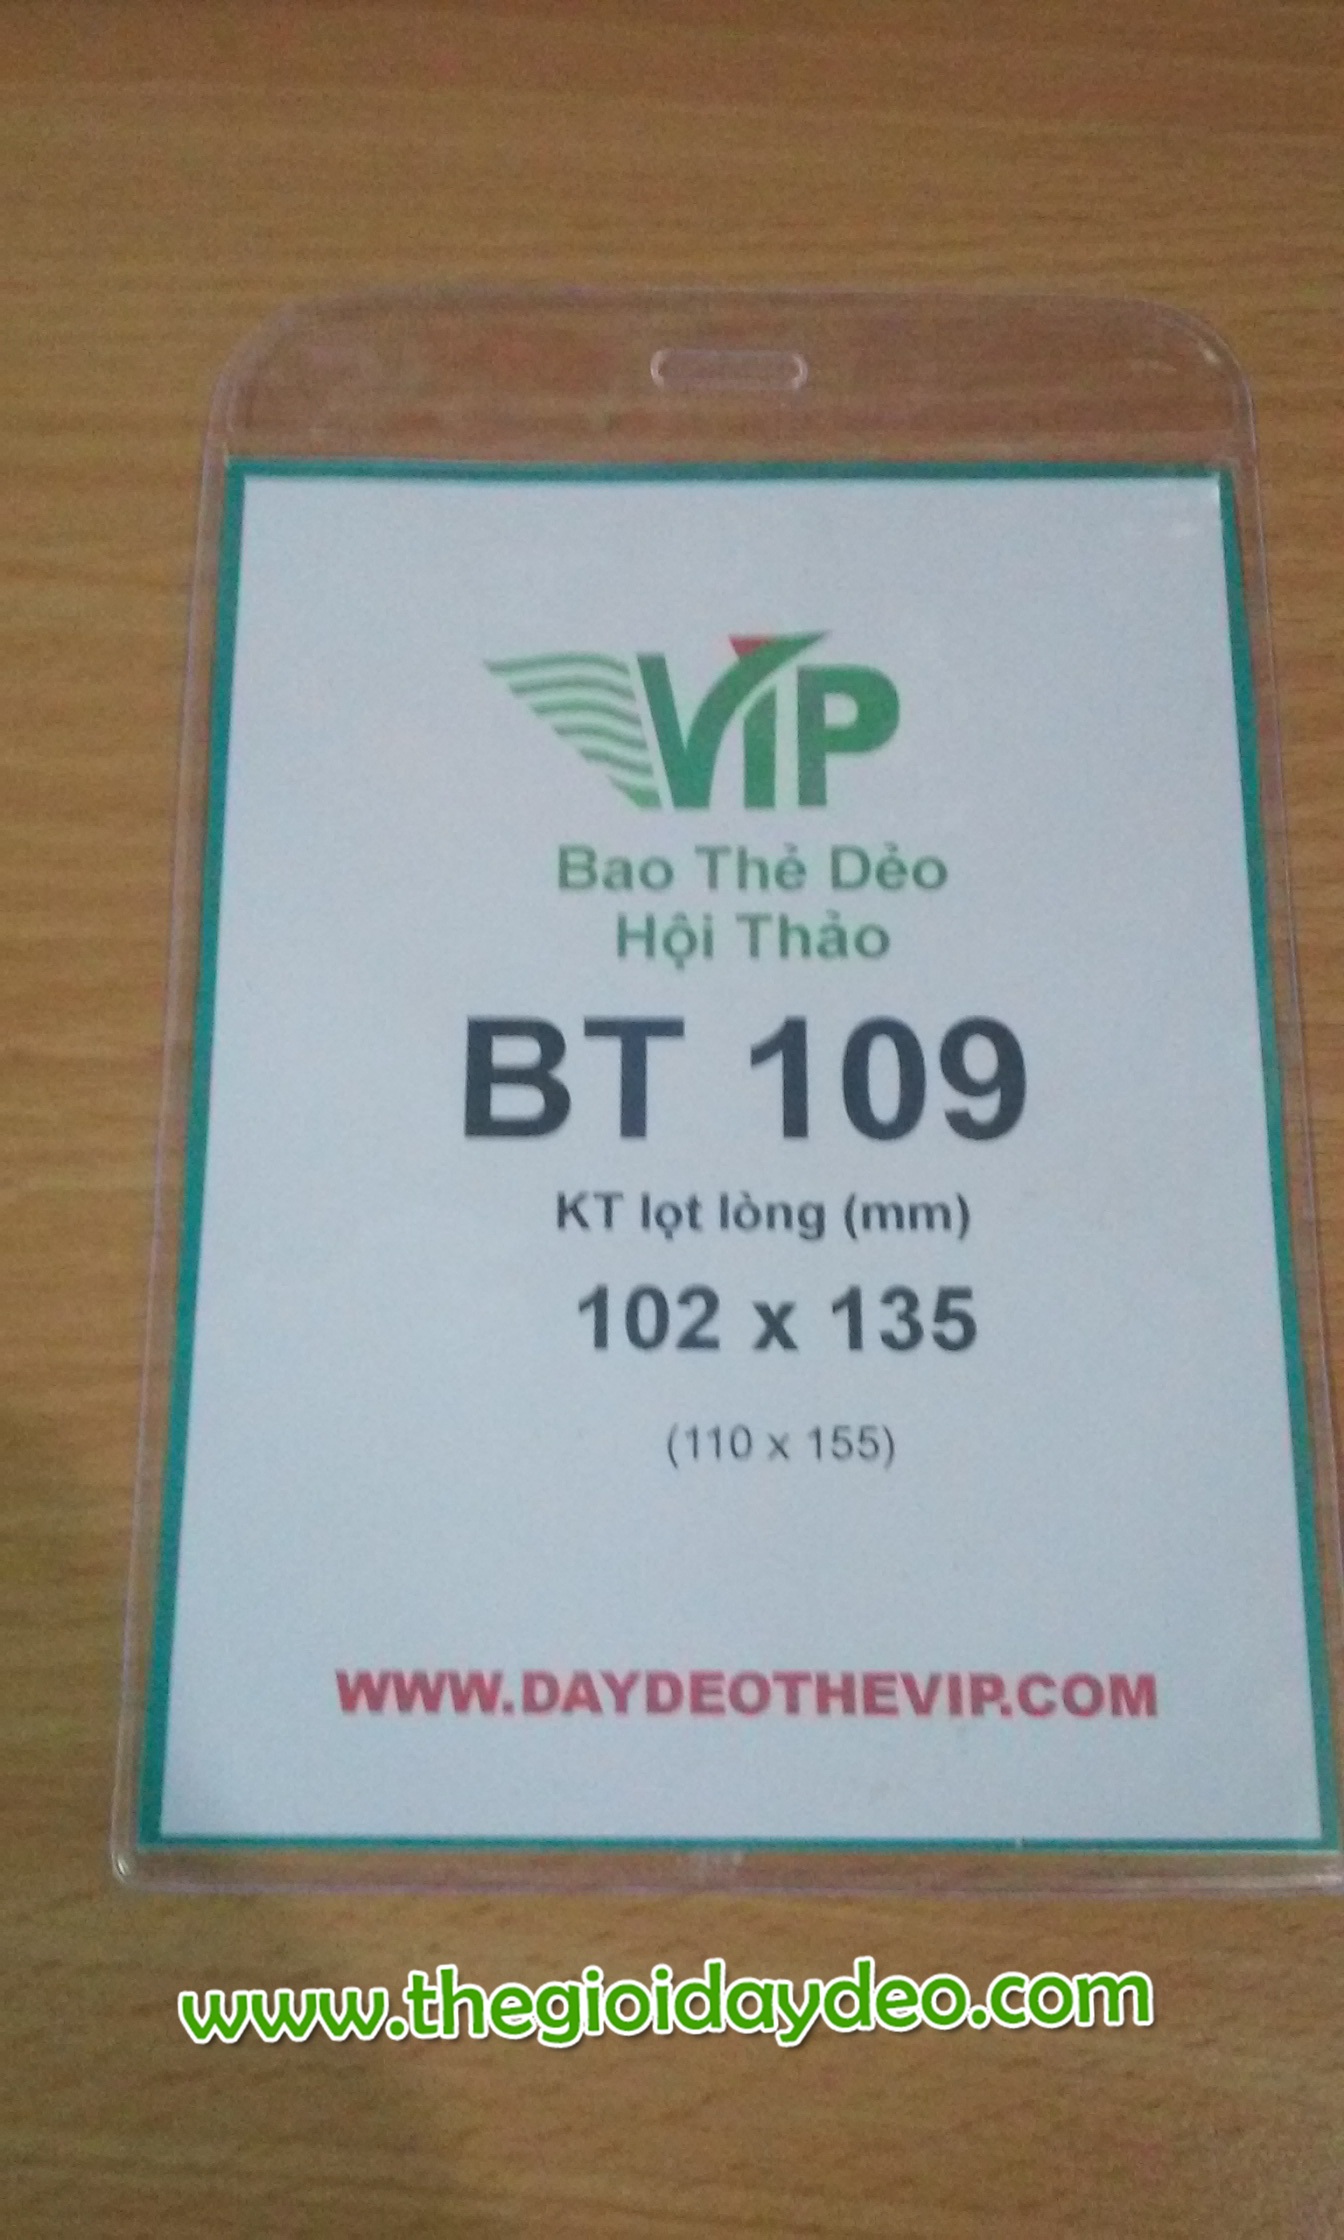 day deo the bt 109